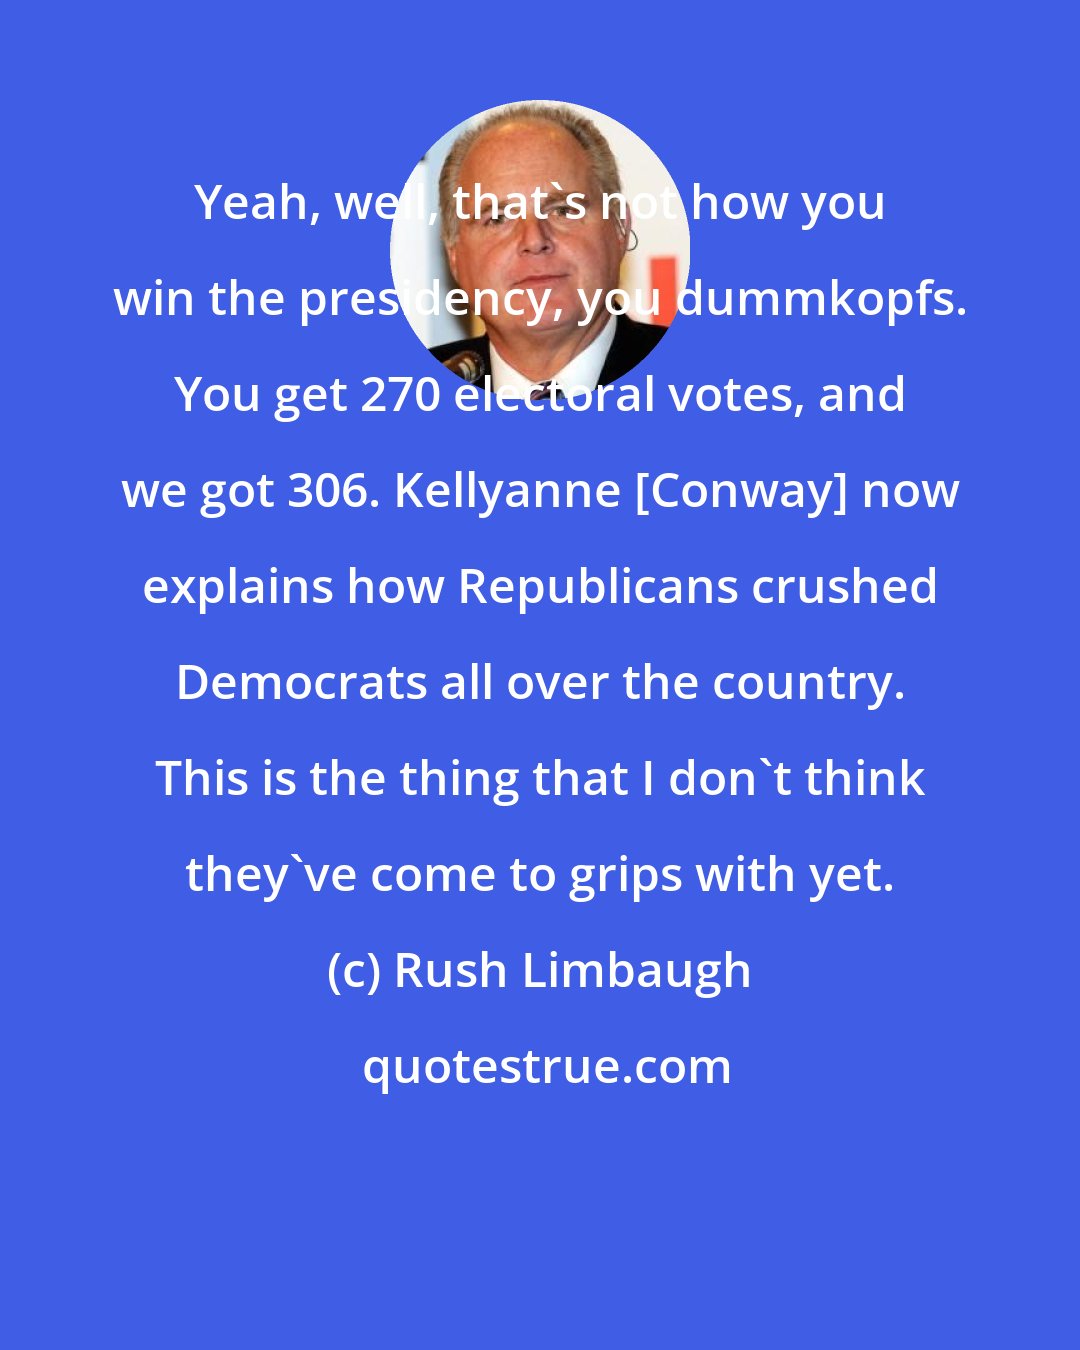 Rush Limbaugh: Yeah, well, that's not how you win the presidency, you dummkopfs. You get 270 electoral votes, and we got 306. Kellyanne [Conway] now explains how Republicans crushed Democrats all over the country. This is the thing that I don't think they've come to grips with yet.